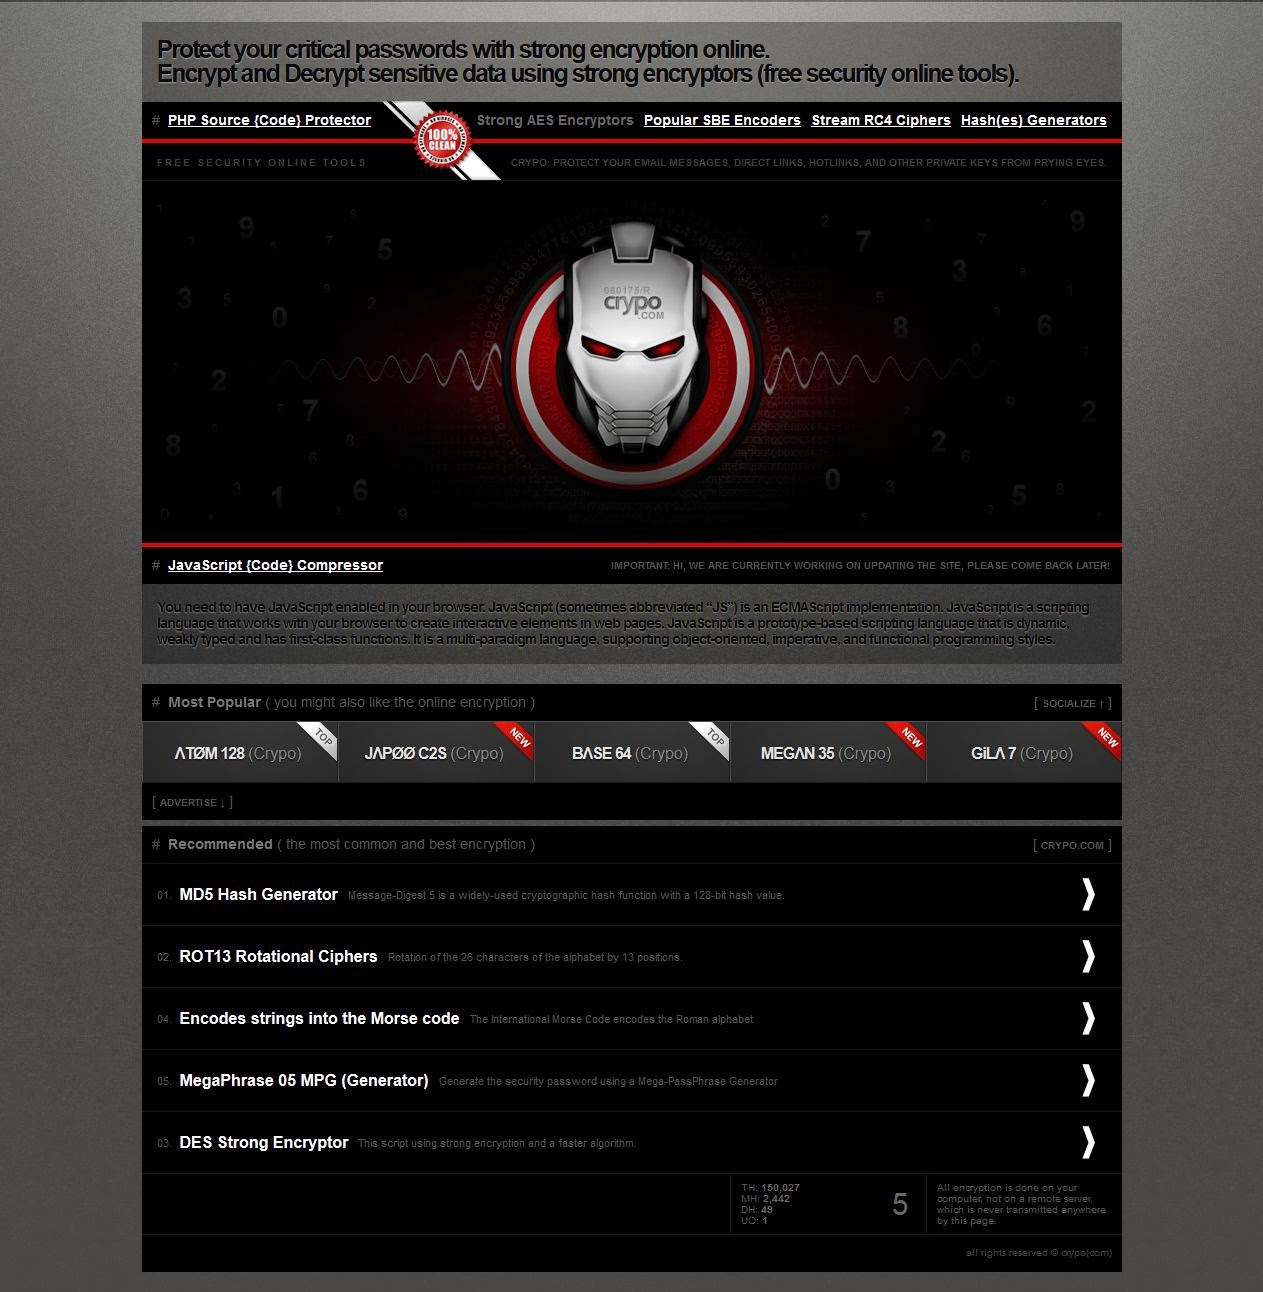 Download Crypo.com site script in PHP - The Hacking Box